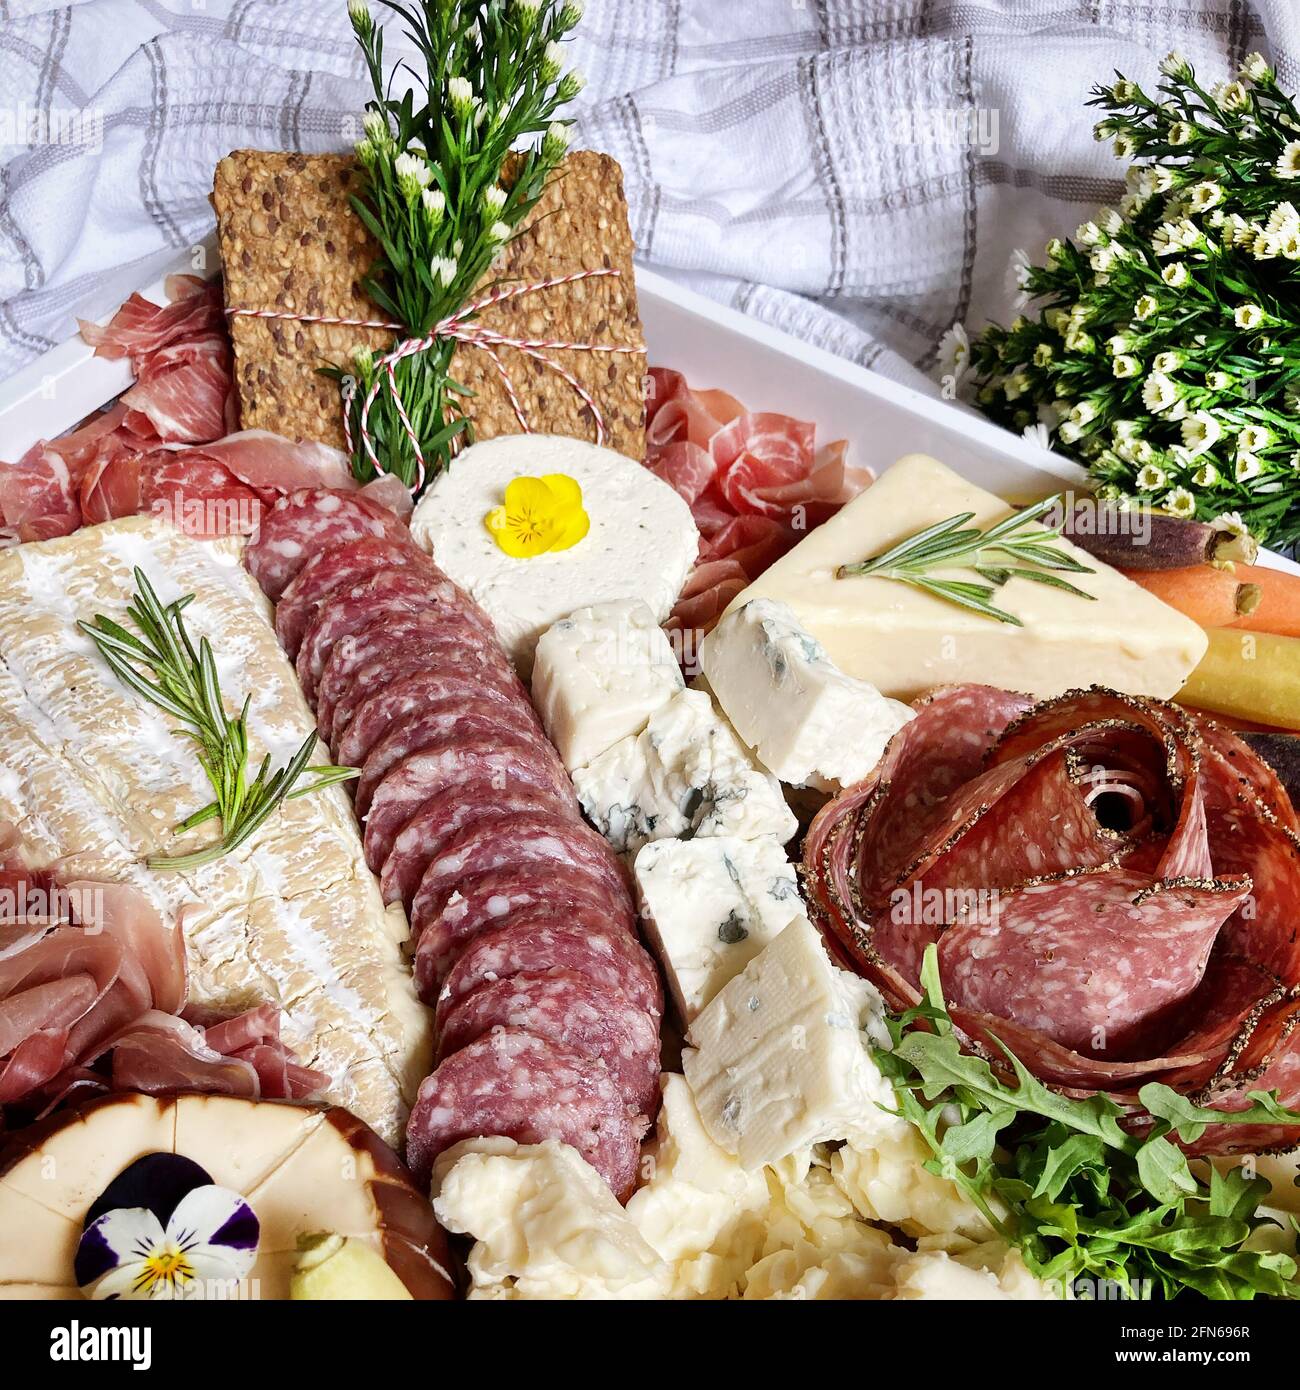 Charcuterie Grazing Board with Sausage, Salami, Cheese and Beet Hummus Stock Photo